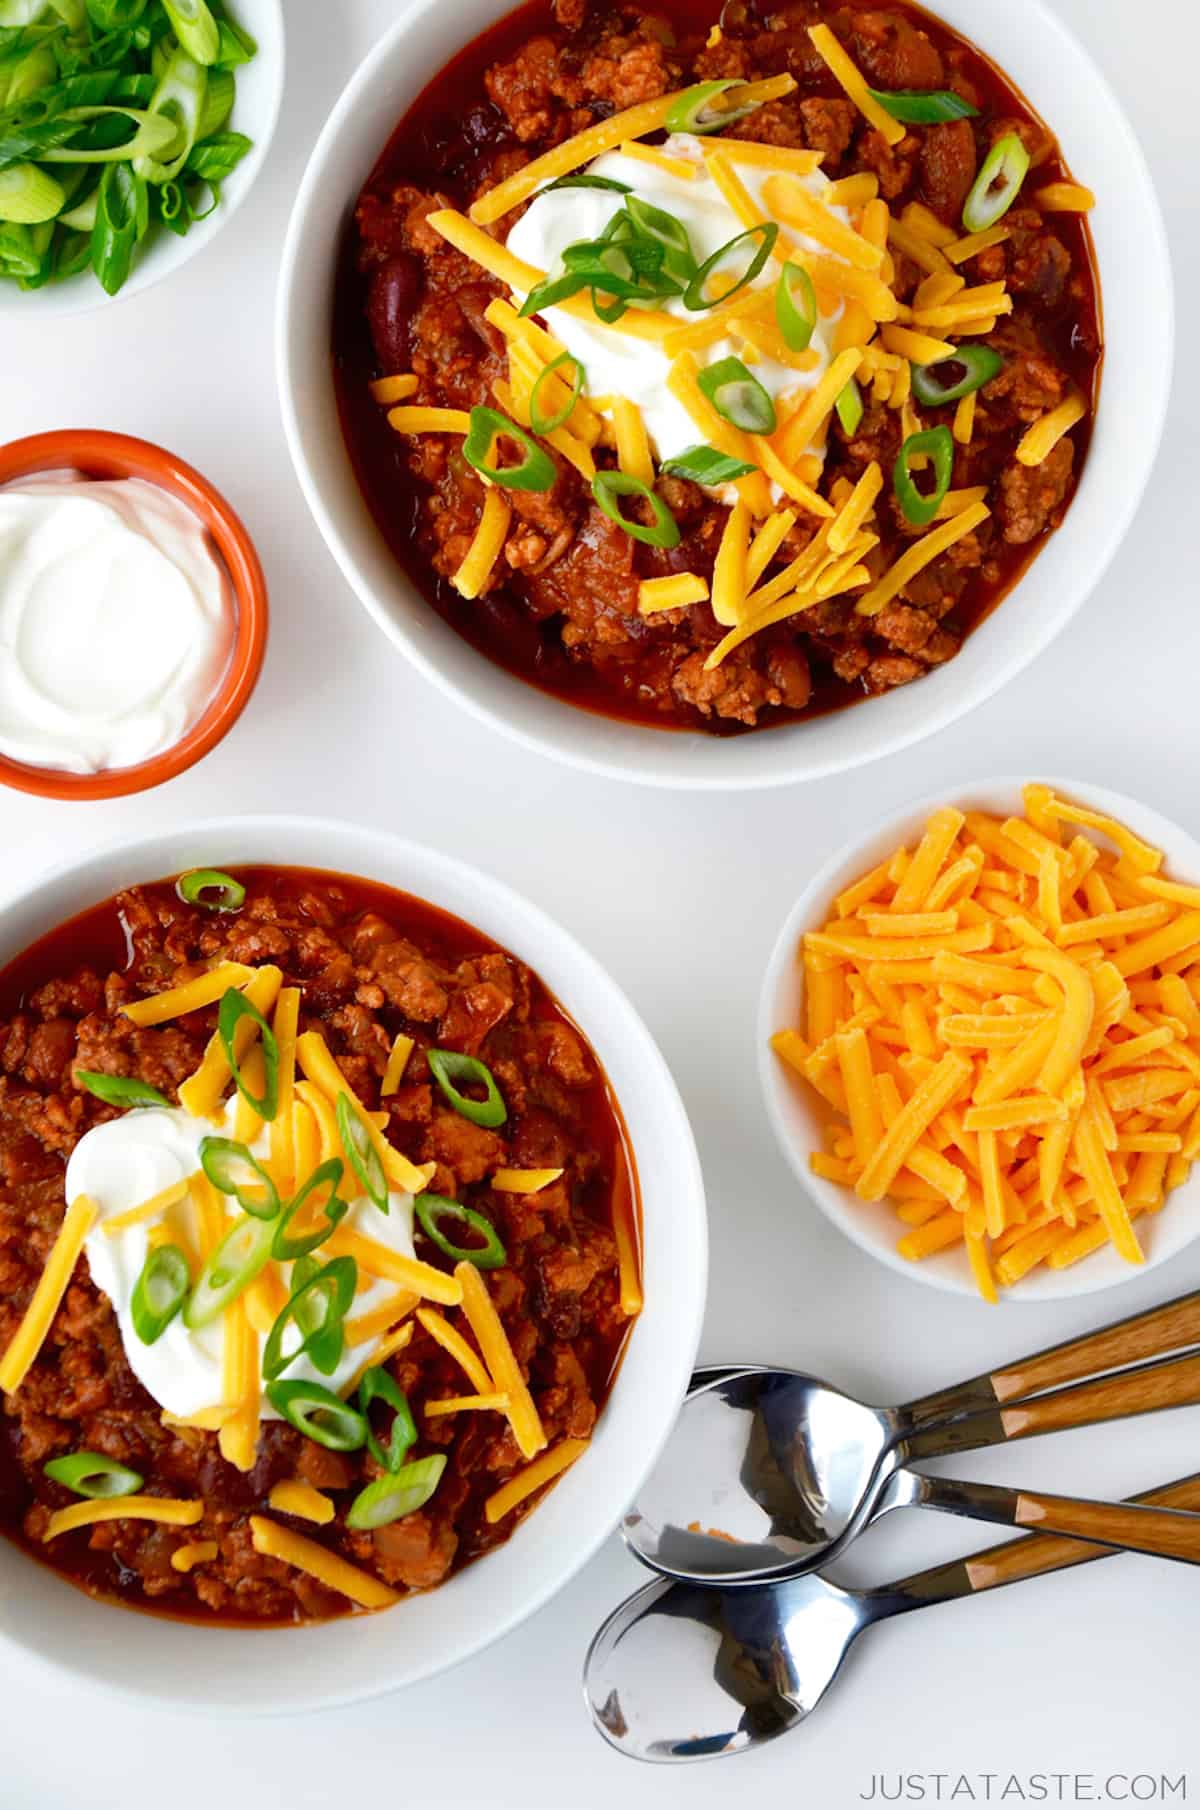 Two bowls of ground chicken chili topped with sour cream, grated cheese and sliced scallions. Spoons and small bowls of extra grated cheese, sour cream and sliced scallions surround the bowls of chili.